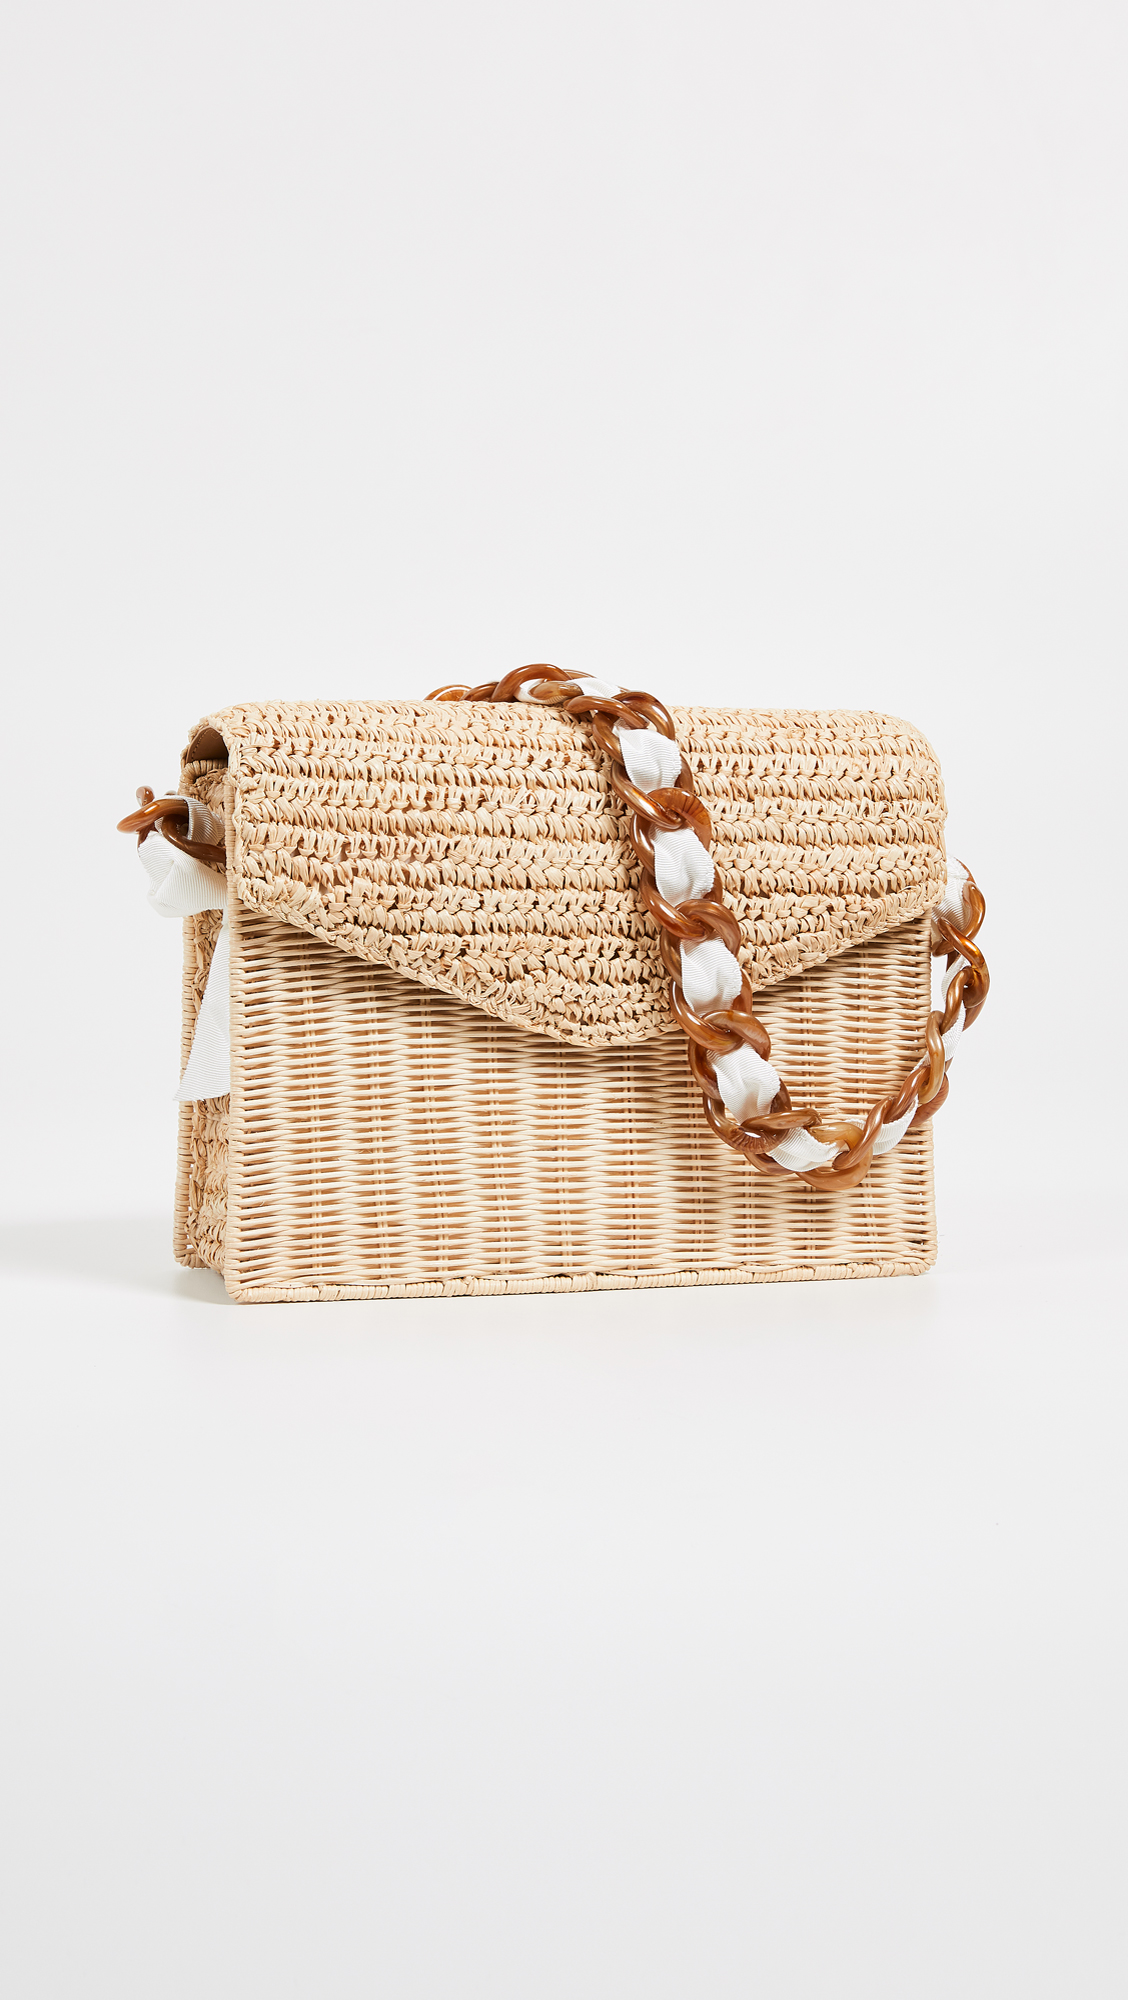 Leather and Straw Mixed Media Shoulder Bag